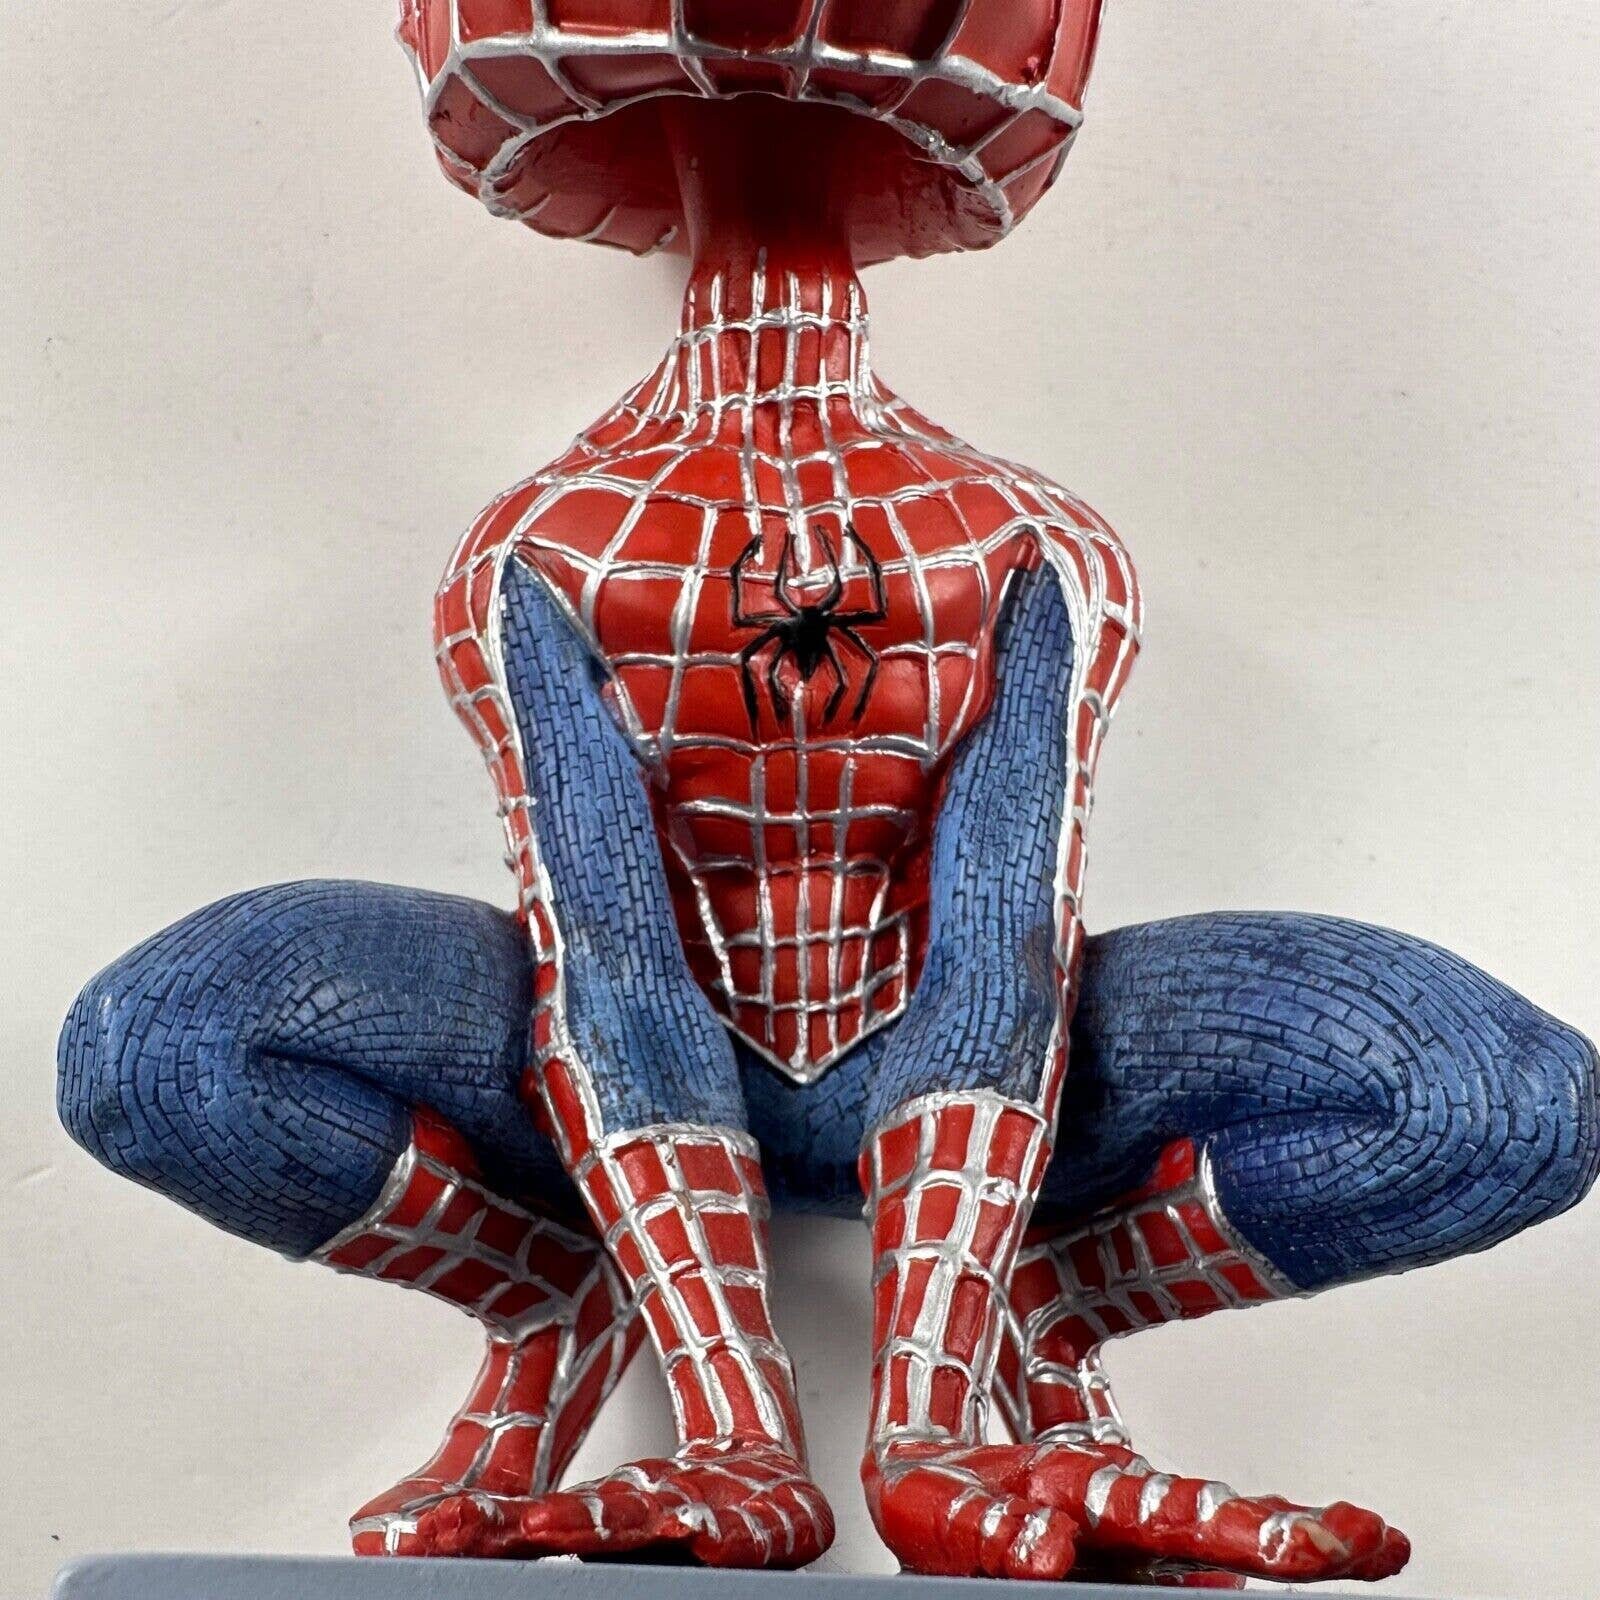 Spider-Man Statues & Bobbleheads